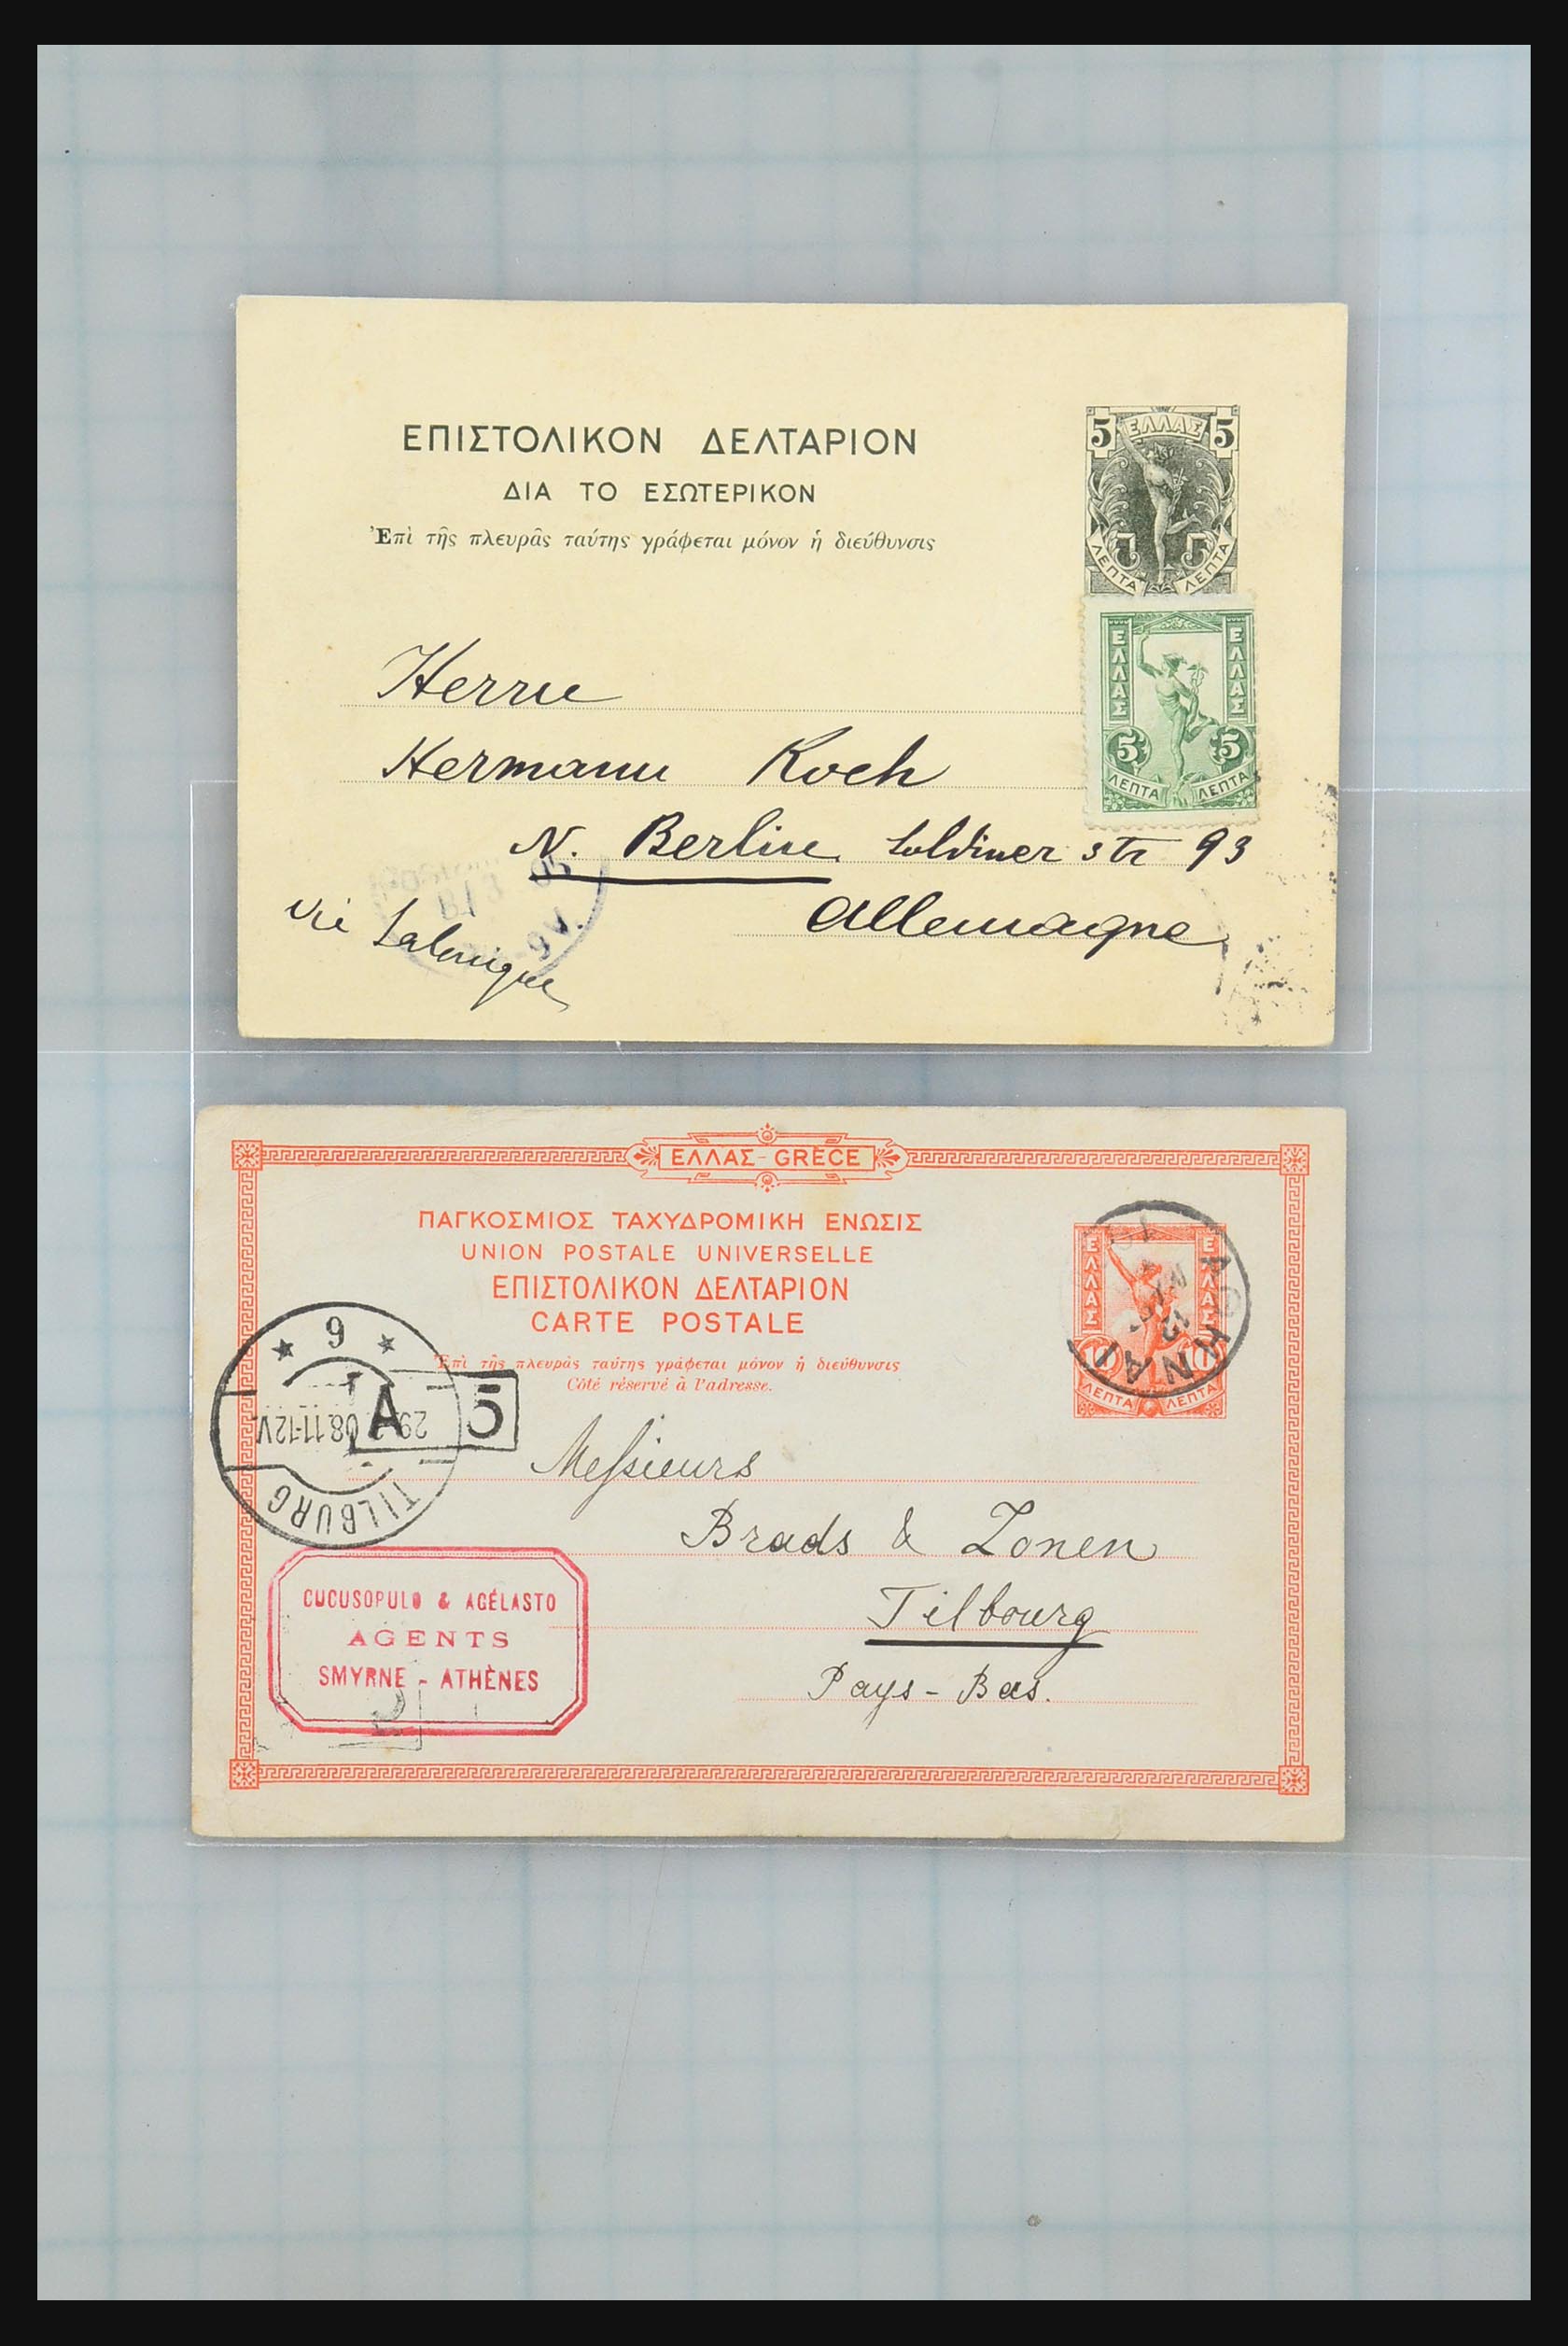 31358 028 - 31358 Portugal/Luxemburg/Greece covers 1880-1960.